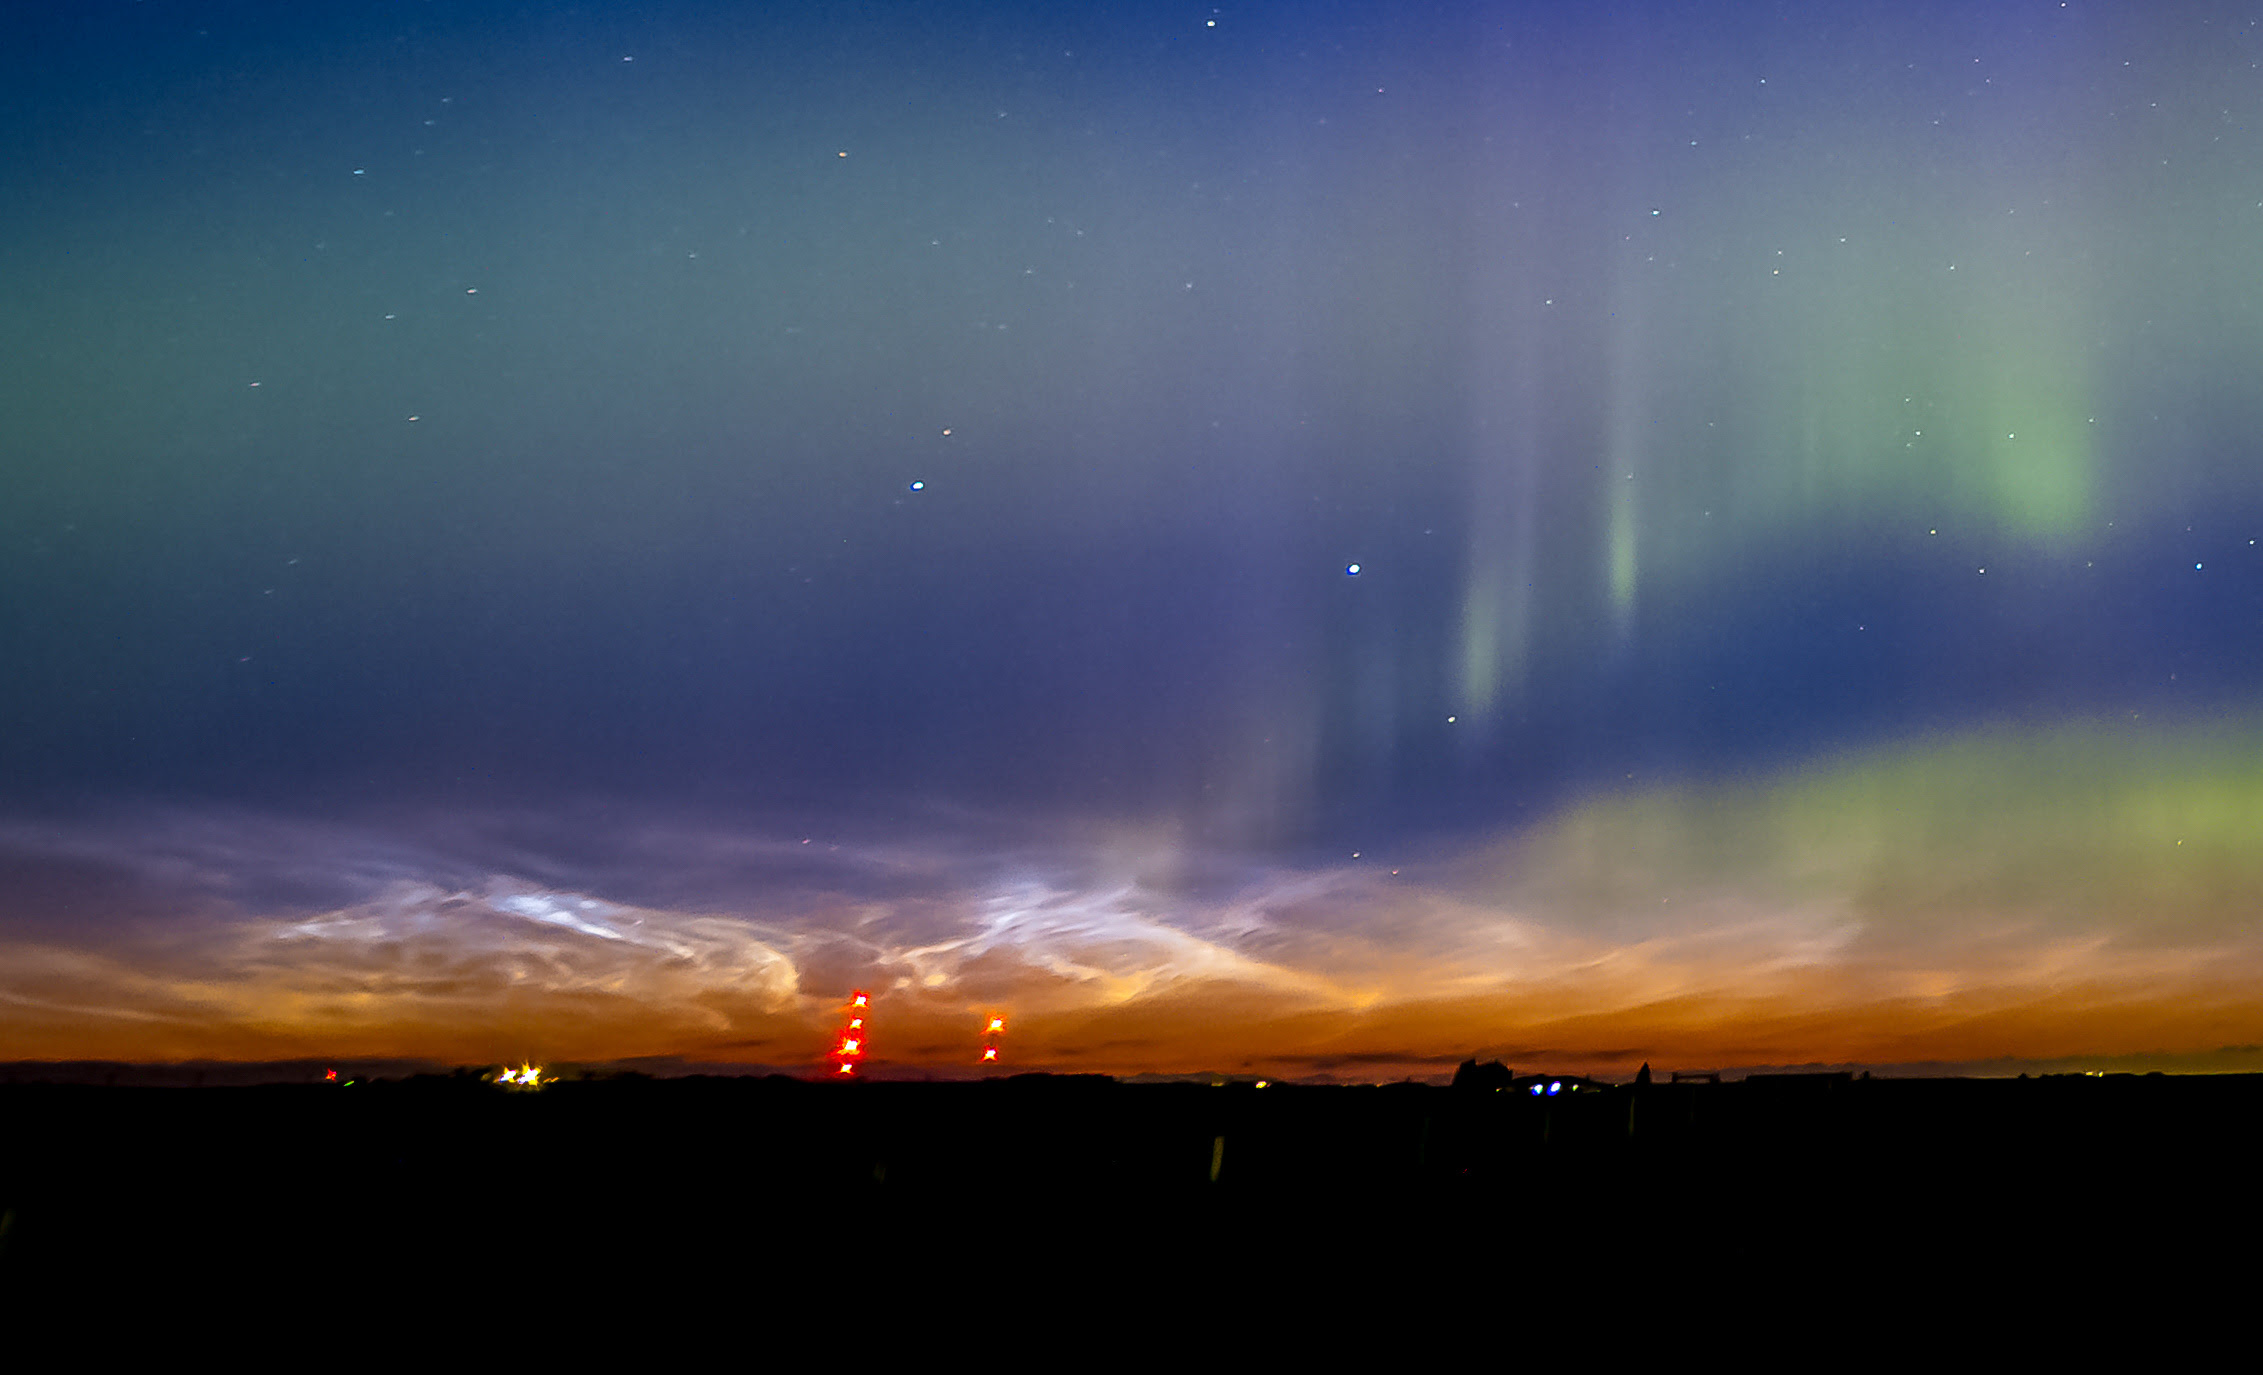 Noctilucent clouds and an aurora | Today's Image | EarthSky